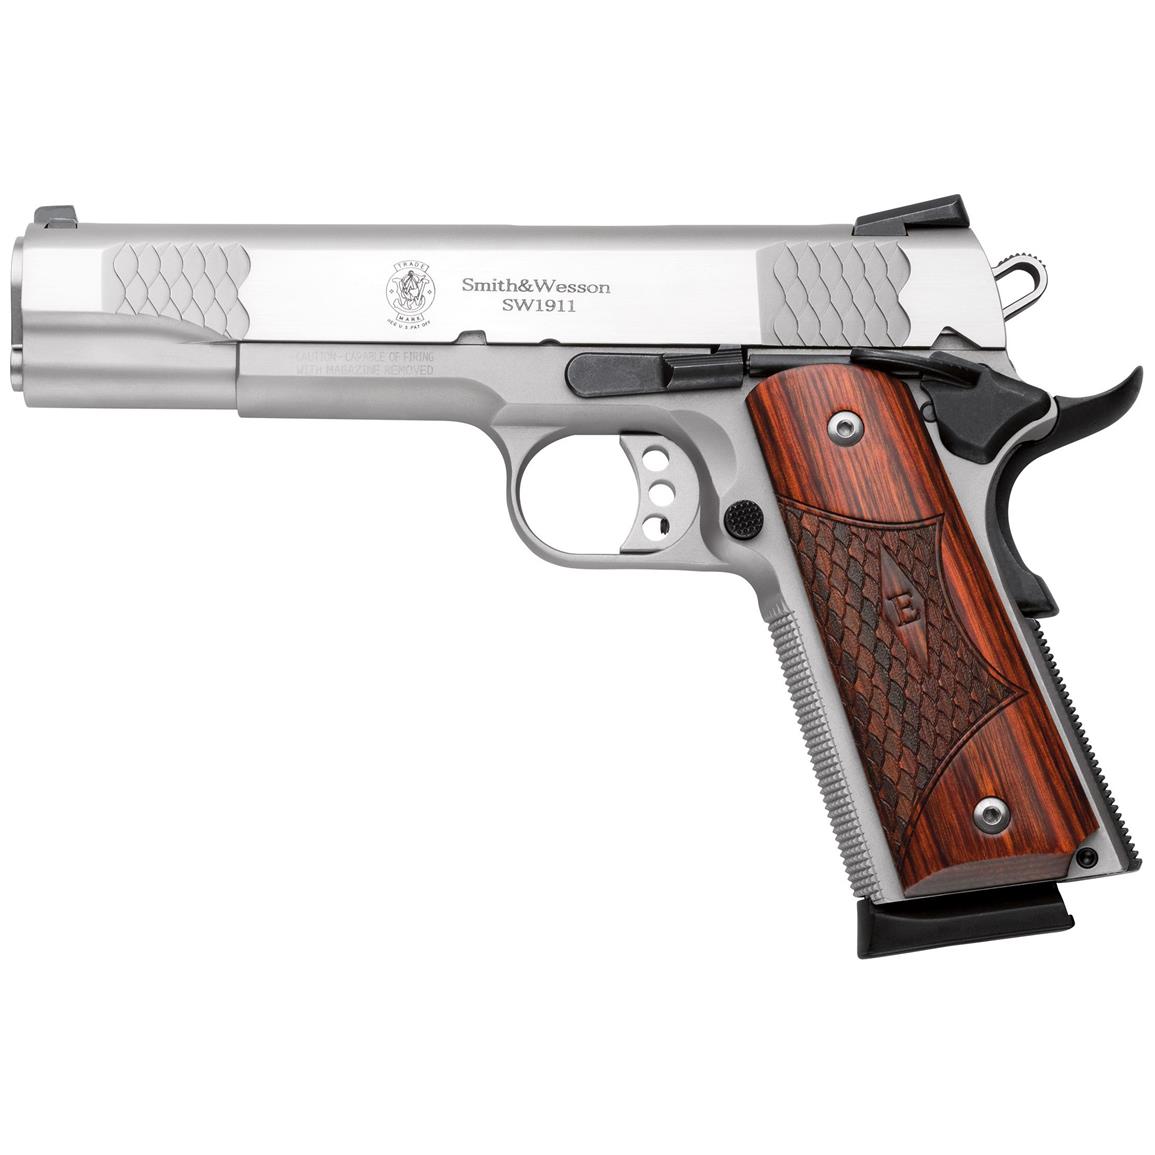 Smith & Wesson SW1911 E-Series, Semi-automatic, .45 ACP, 108482, 022188084825, Stainless Steel